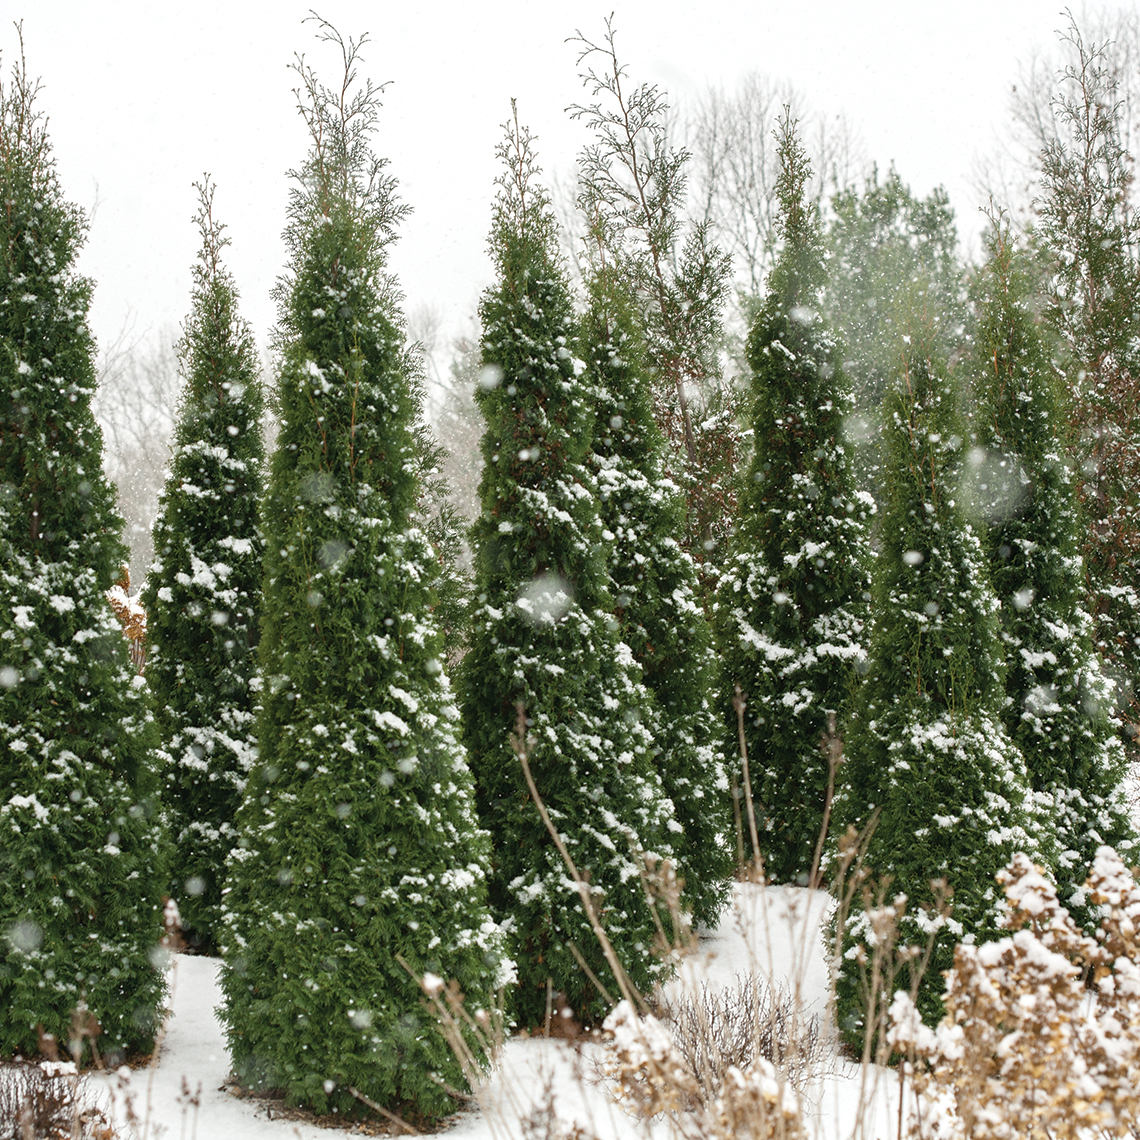 A cluster of narrow columnar North Pole arborvitae in winter with snow